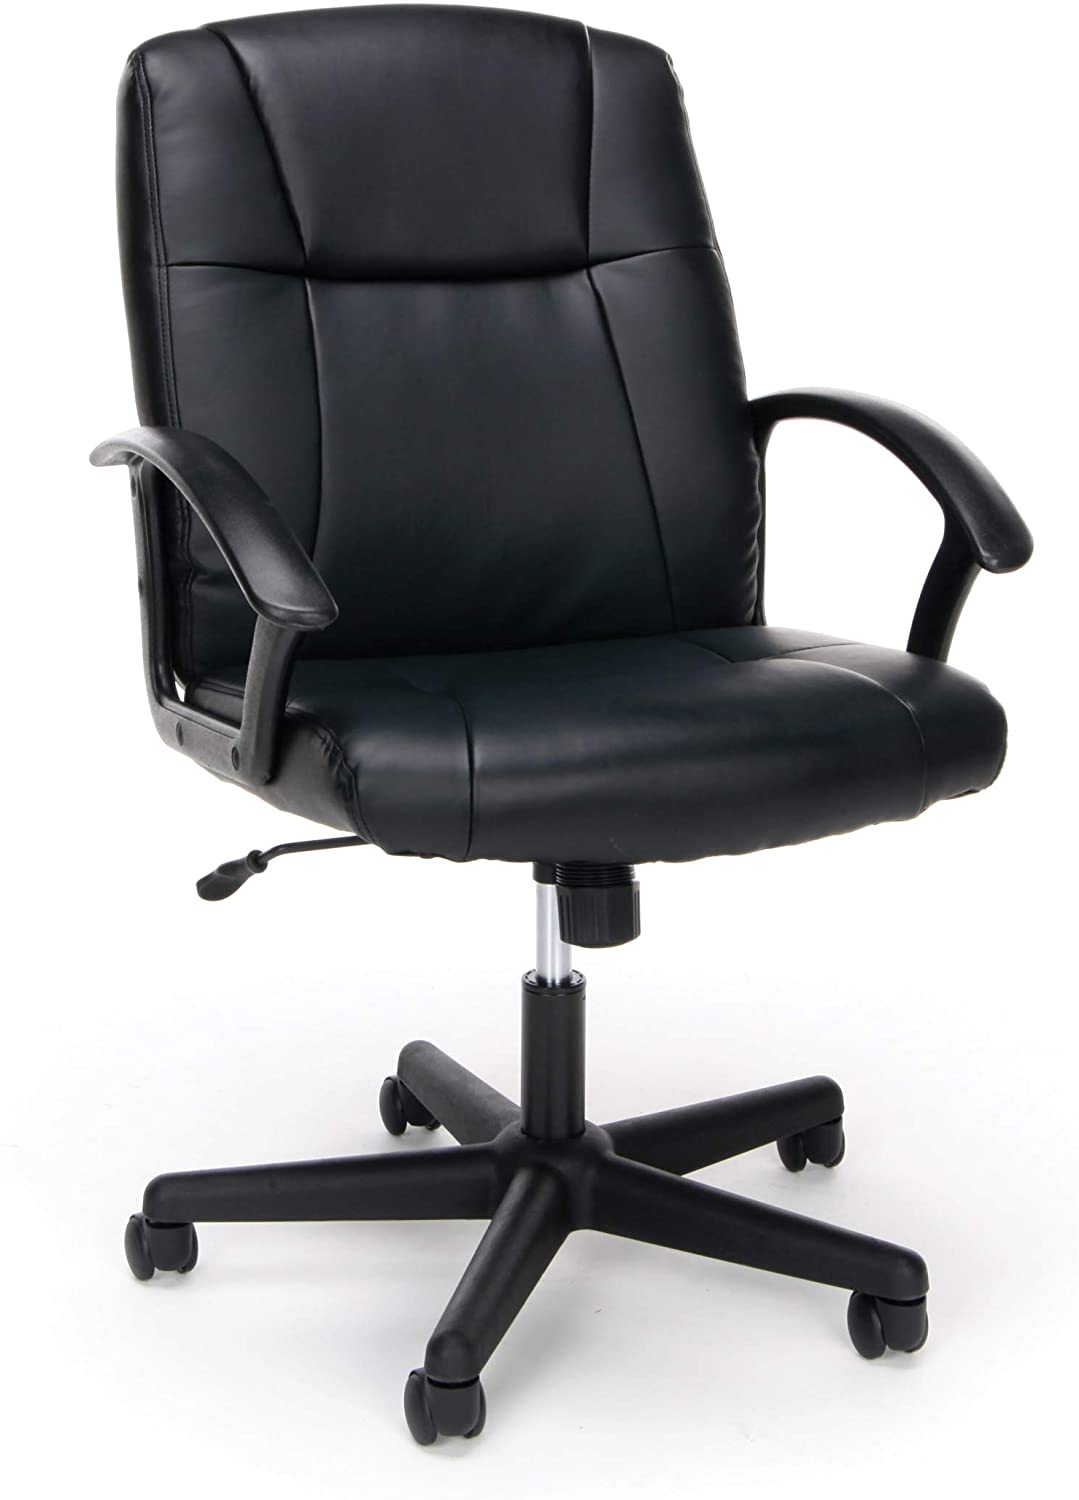 OFM Essentials Collection Executive Office Chair, Bonded Leather, in Black